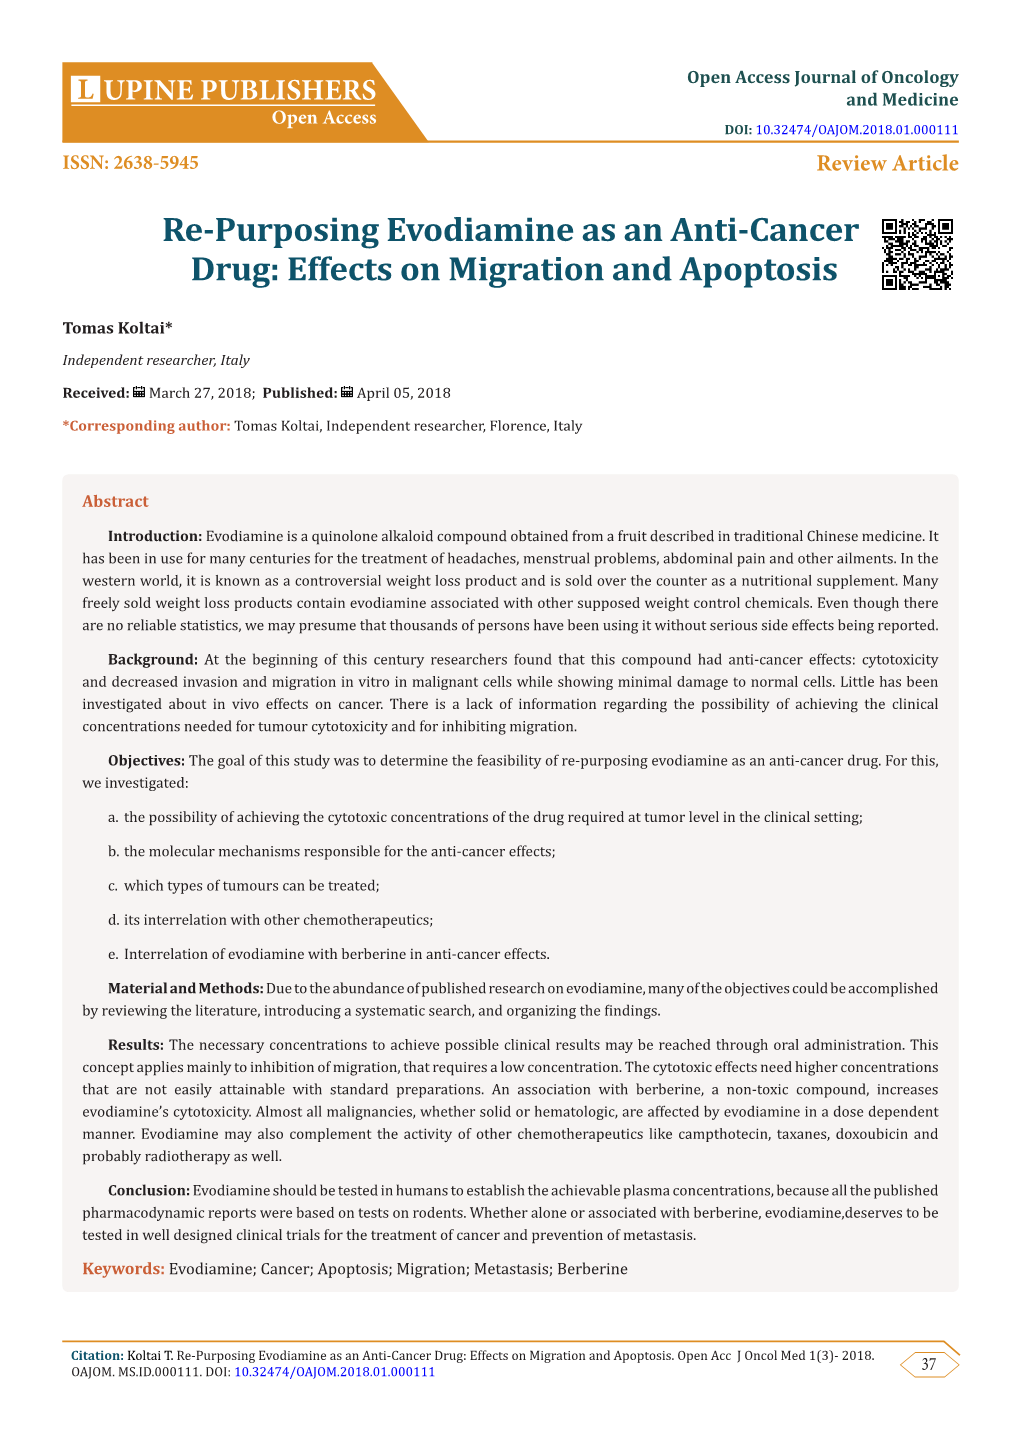 Re-Purposing Evodiamine As an Anti-Cancer Drug: Effects on Migration and Apoptosis